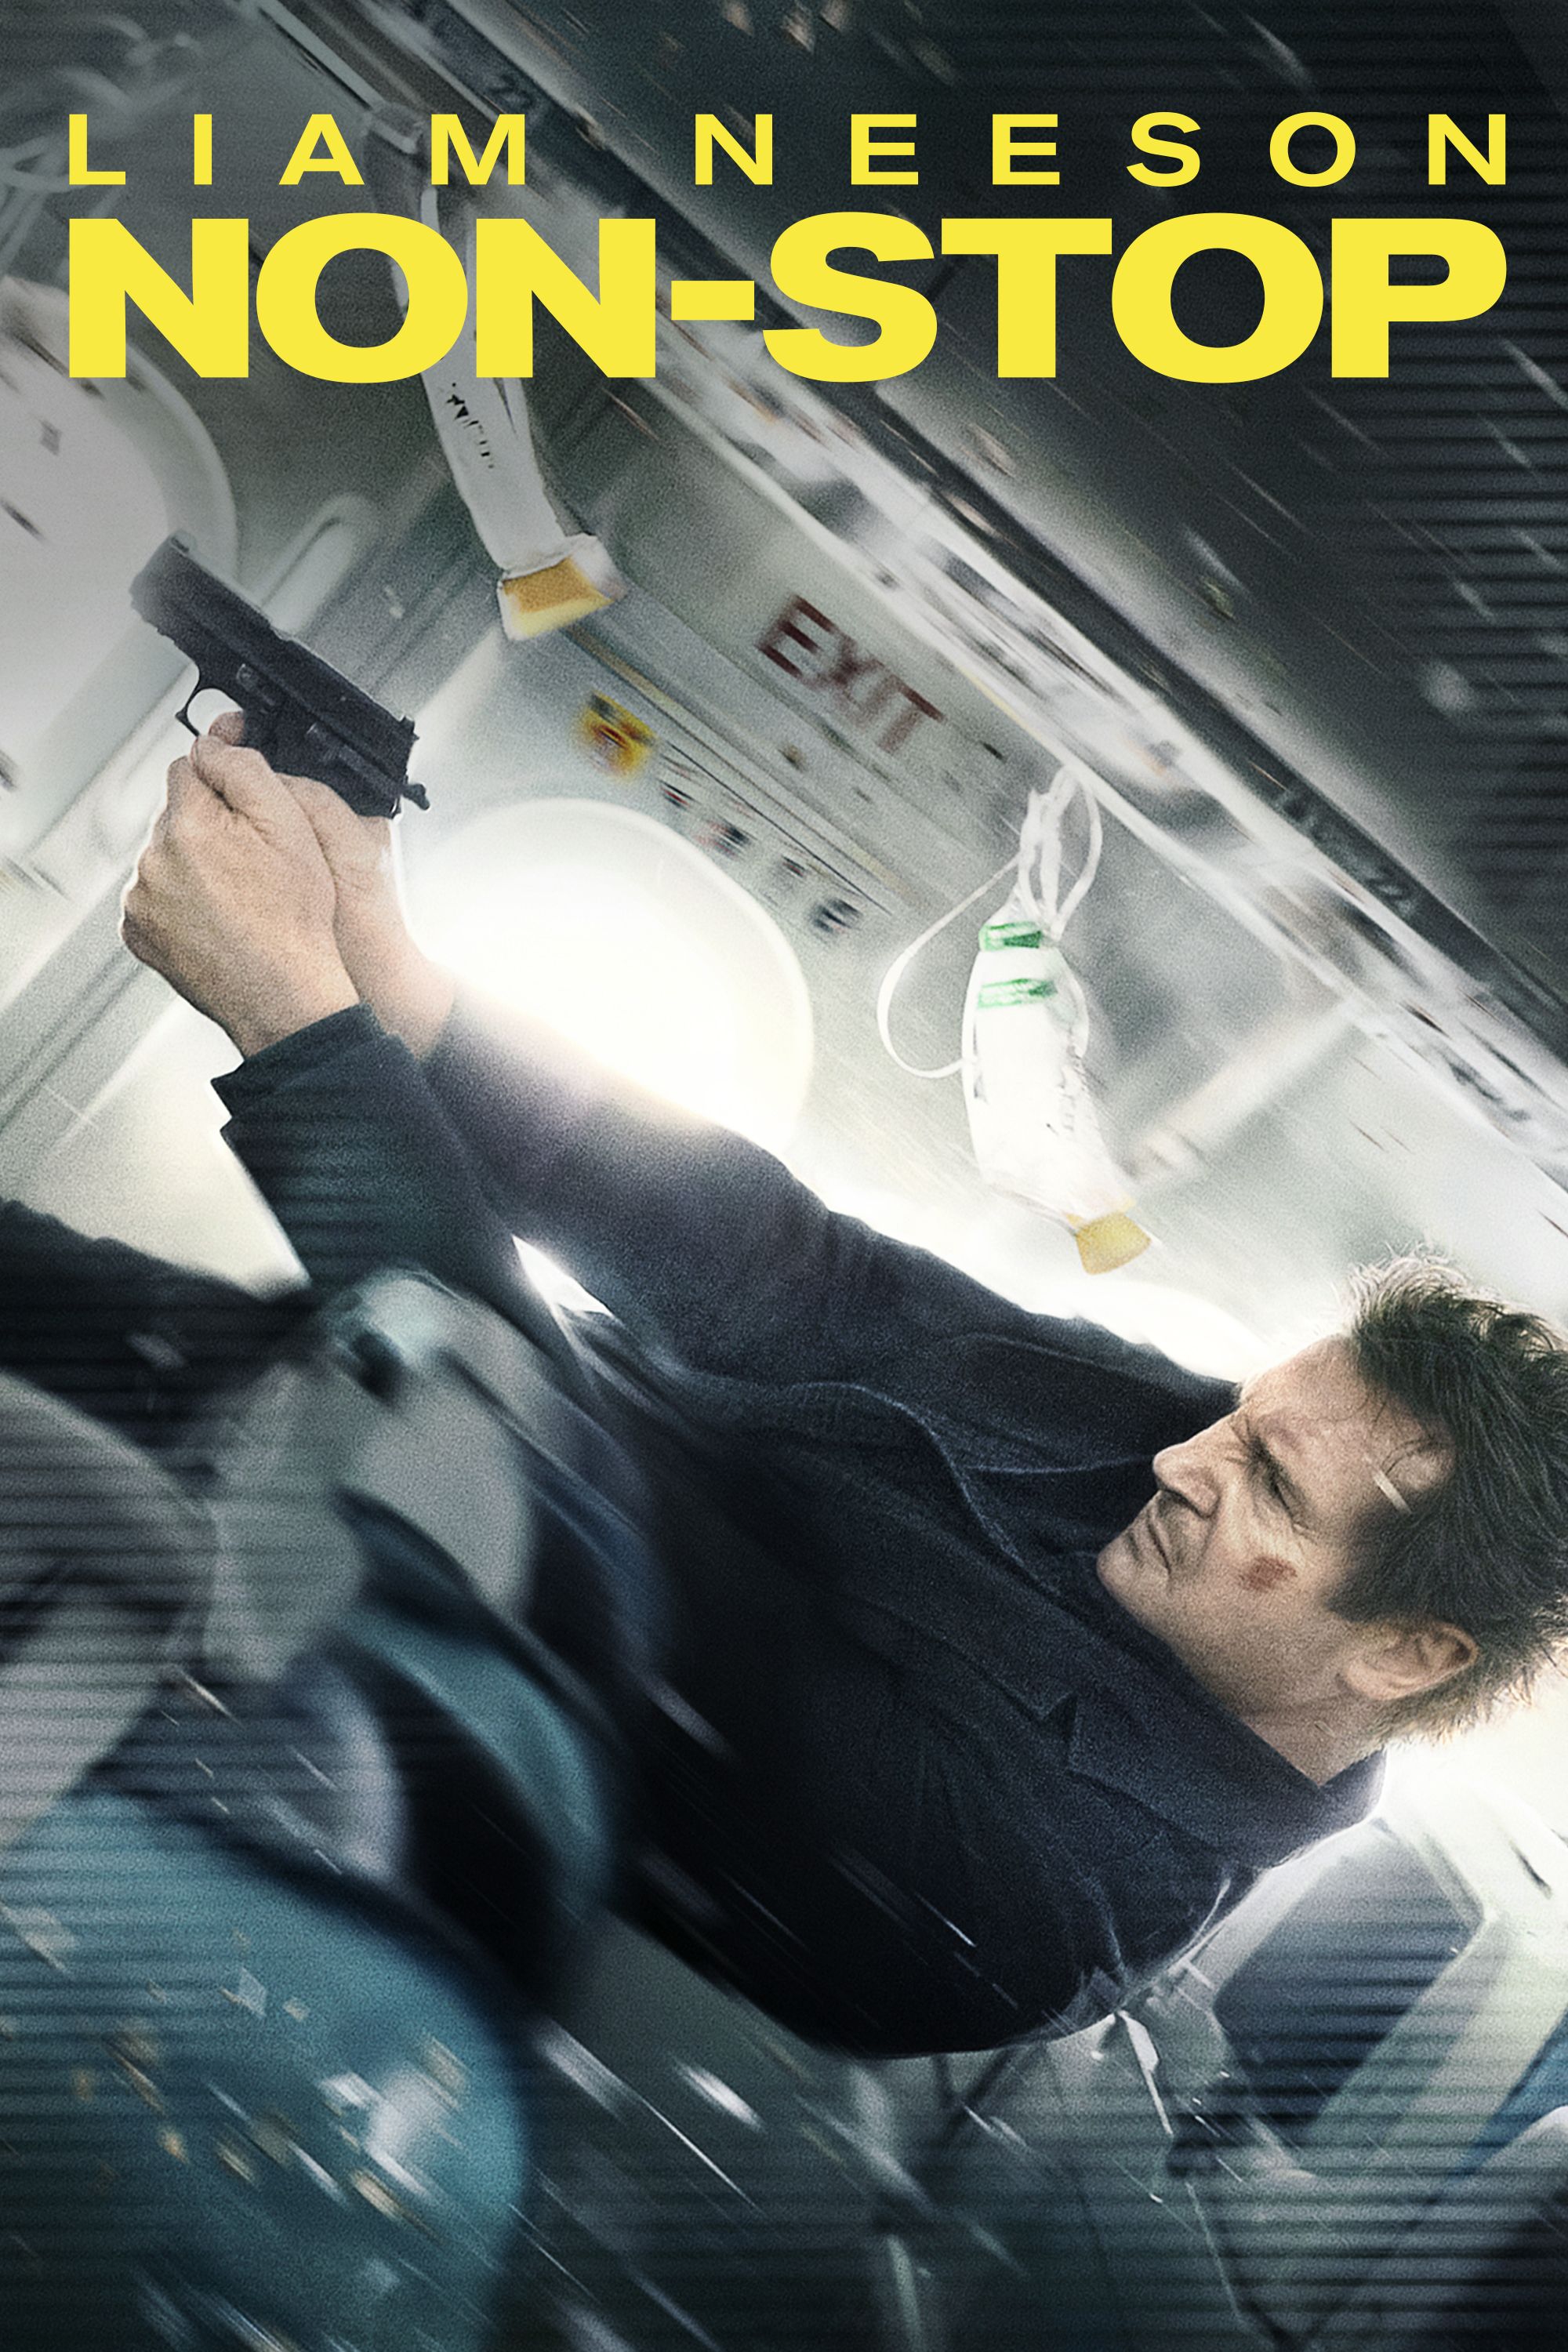 Non Stop Non Stop With Liam Neeson Lives Up To Its Title The New York